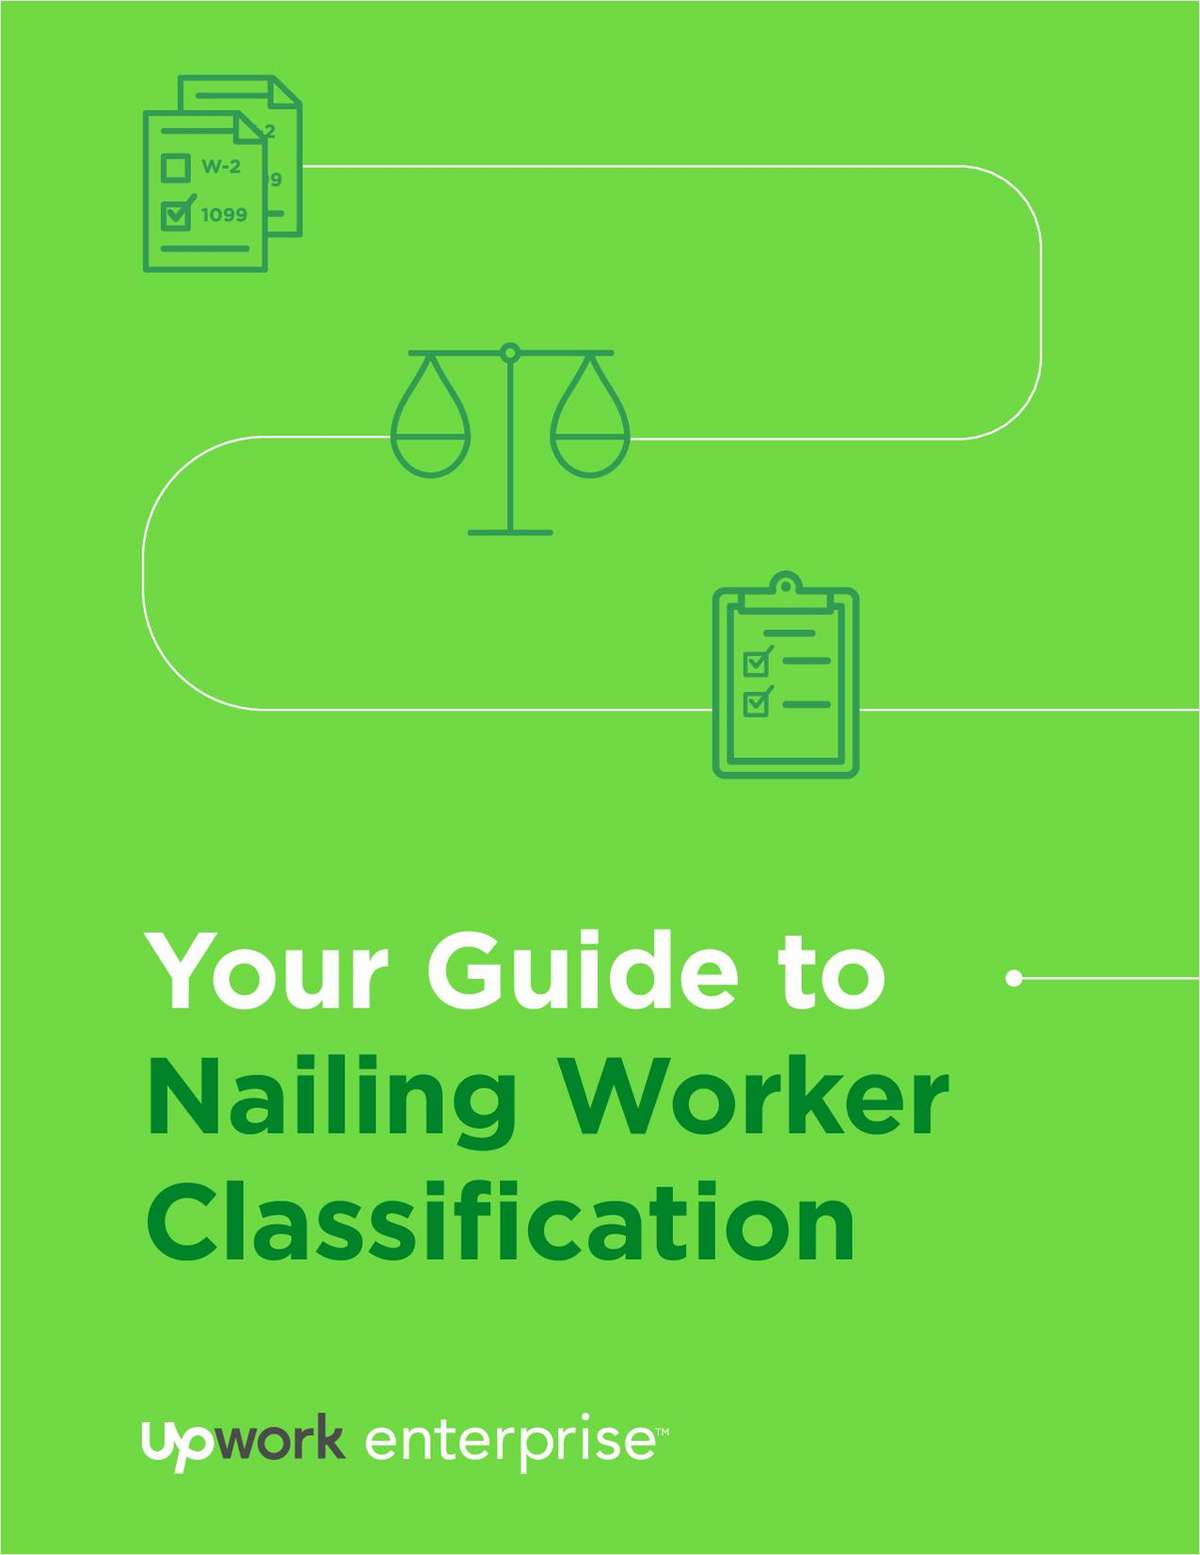 Your Guide to Nailing Worker Classification